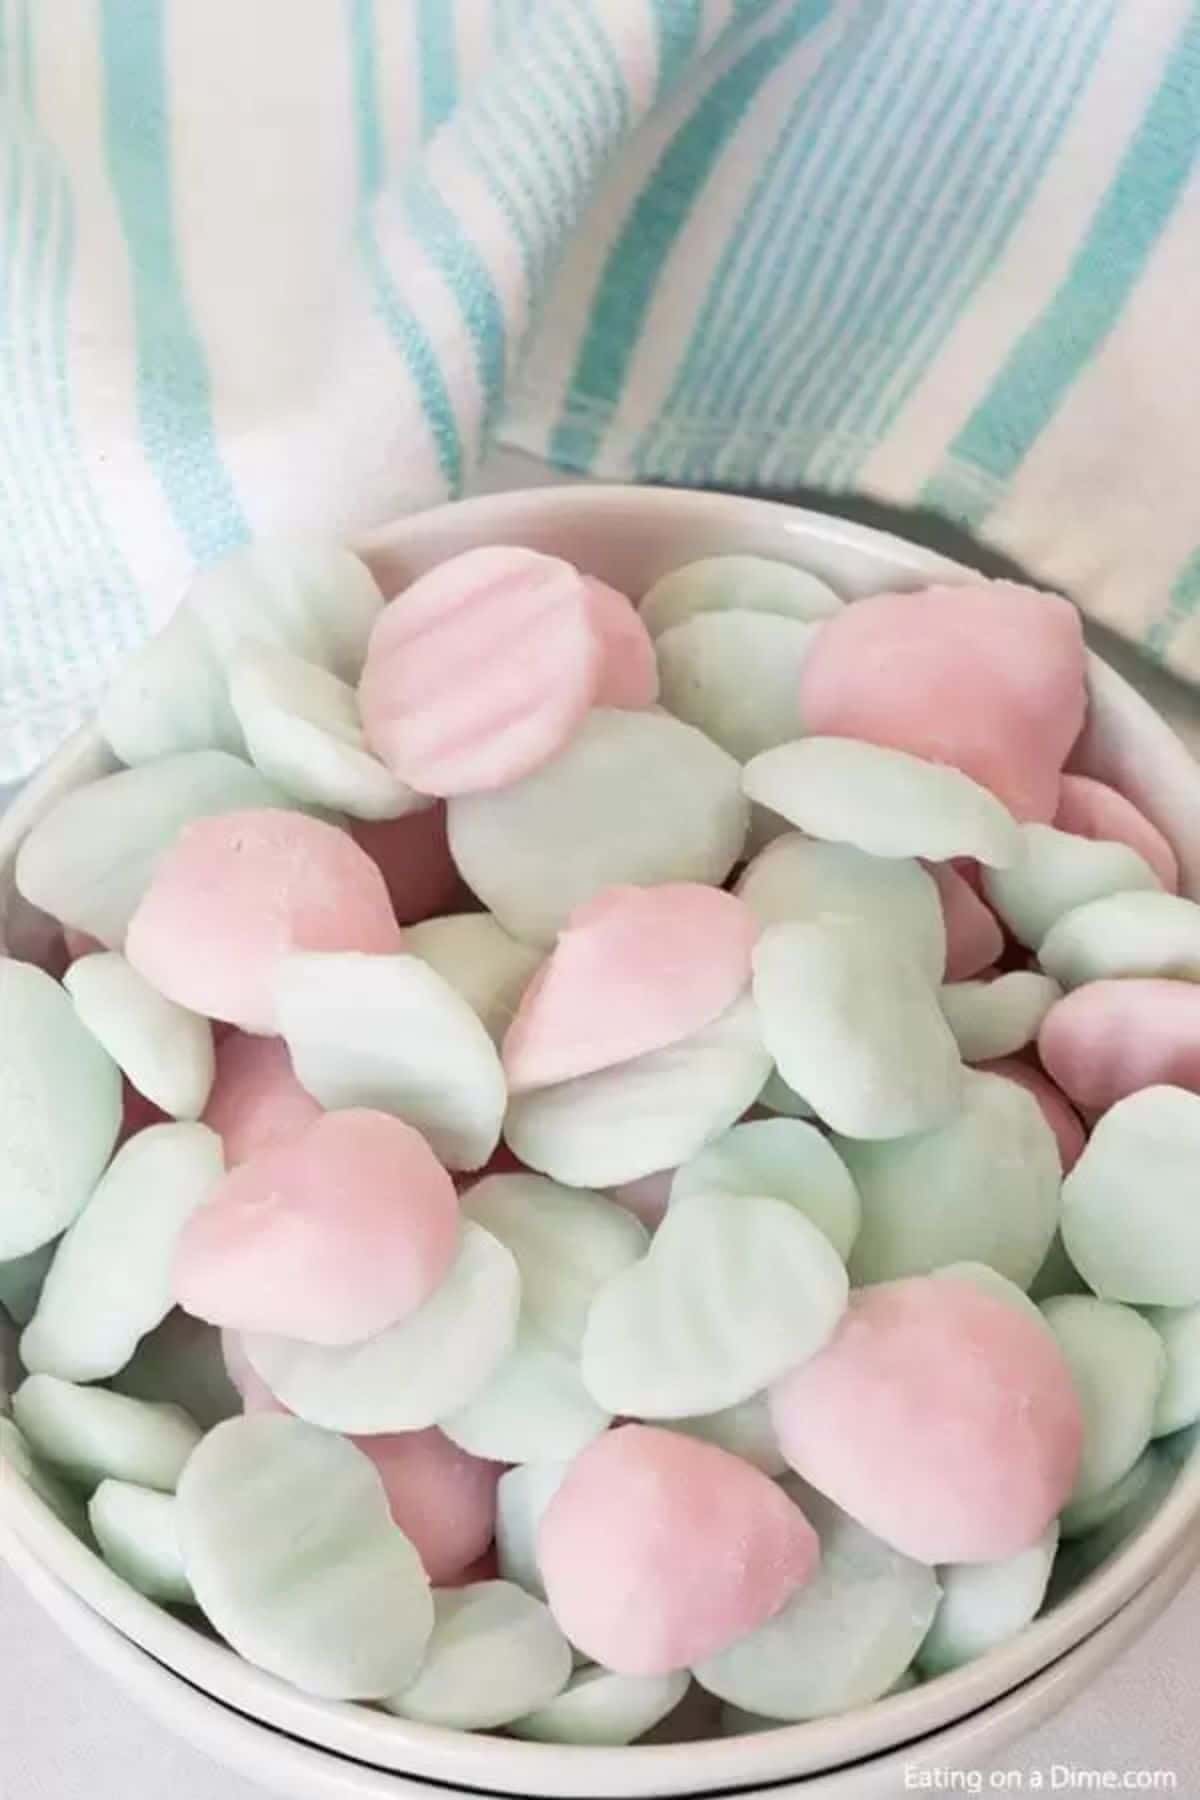 in a bowl on top of a green and white striped cloth iare yoghurt bites